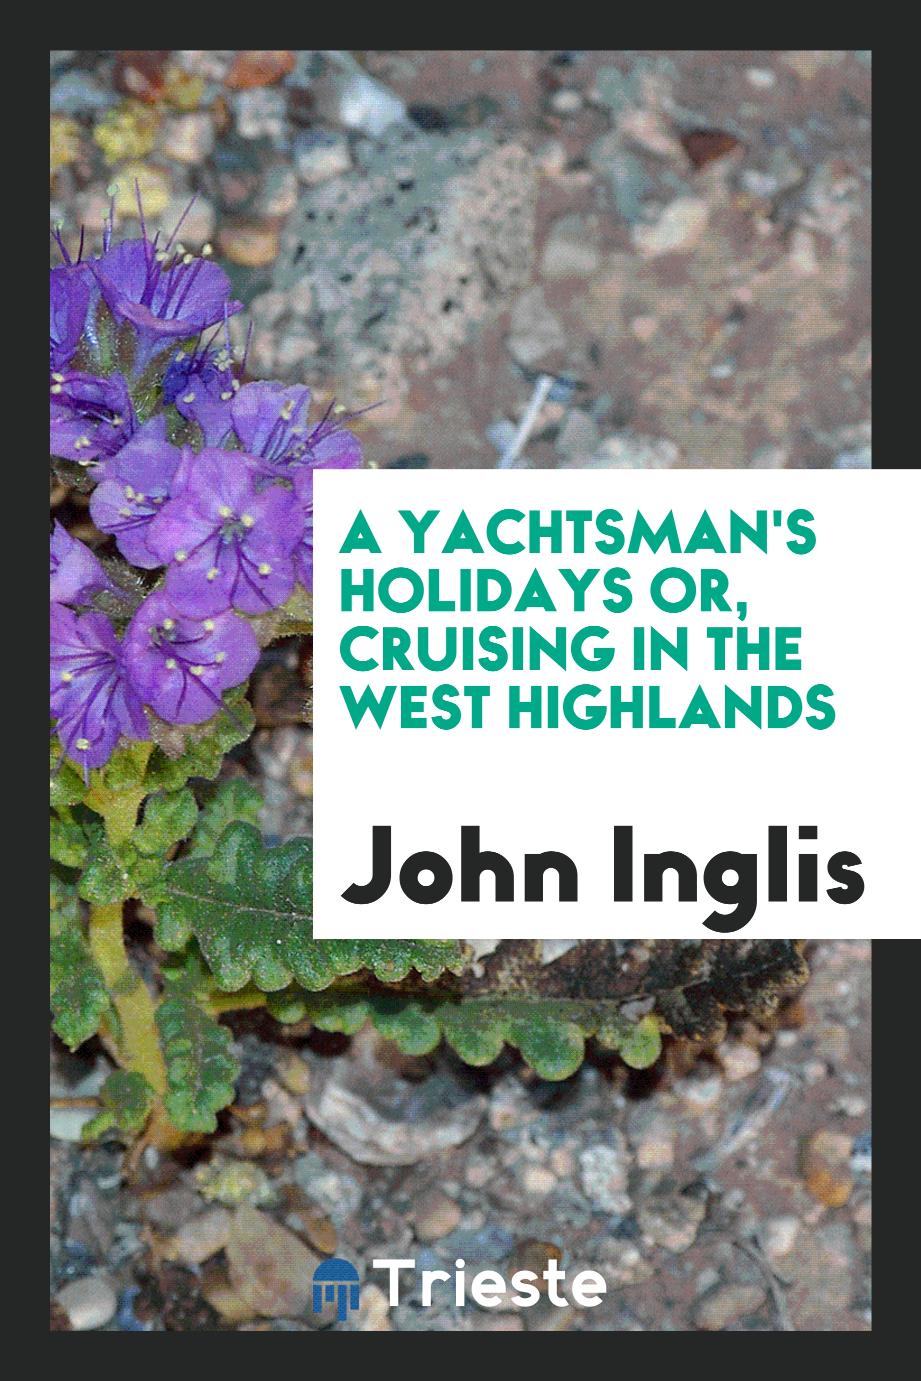 A Yachtsman's Holidays or, Cruising in the West Highlands